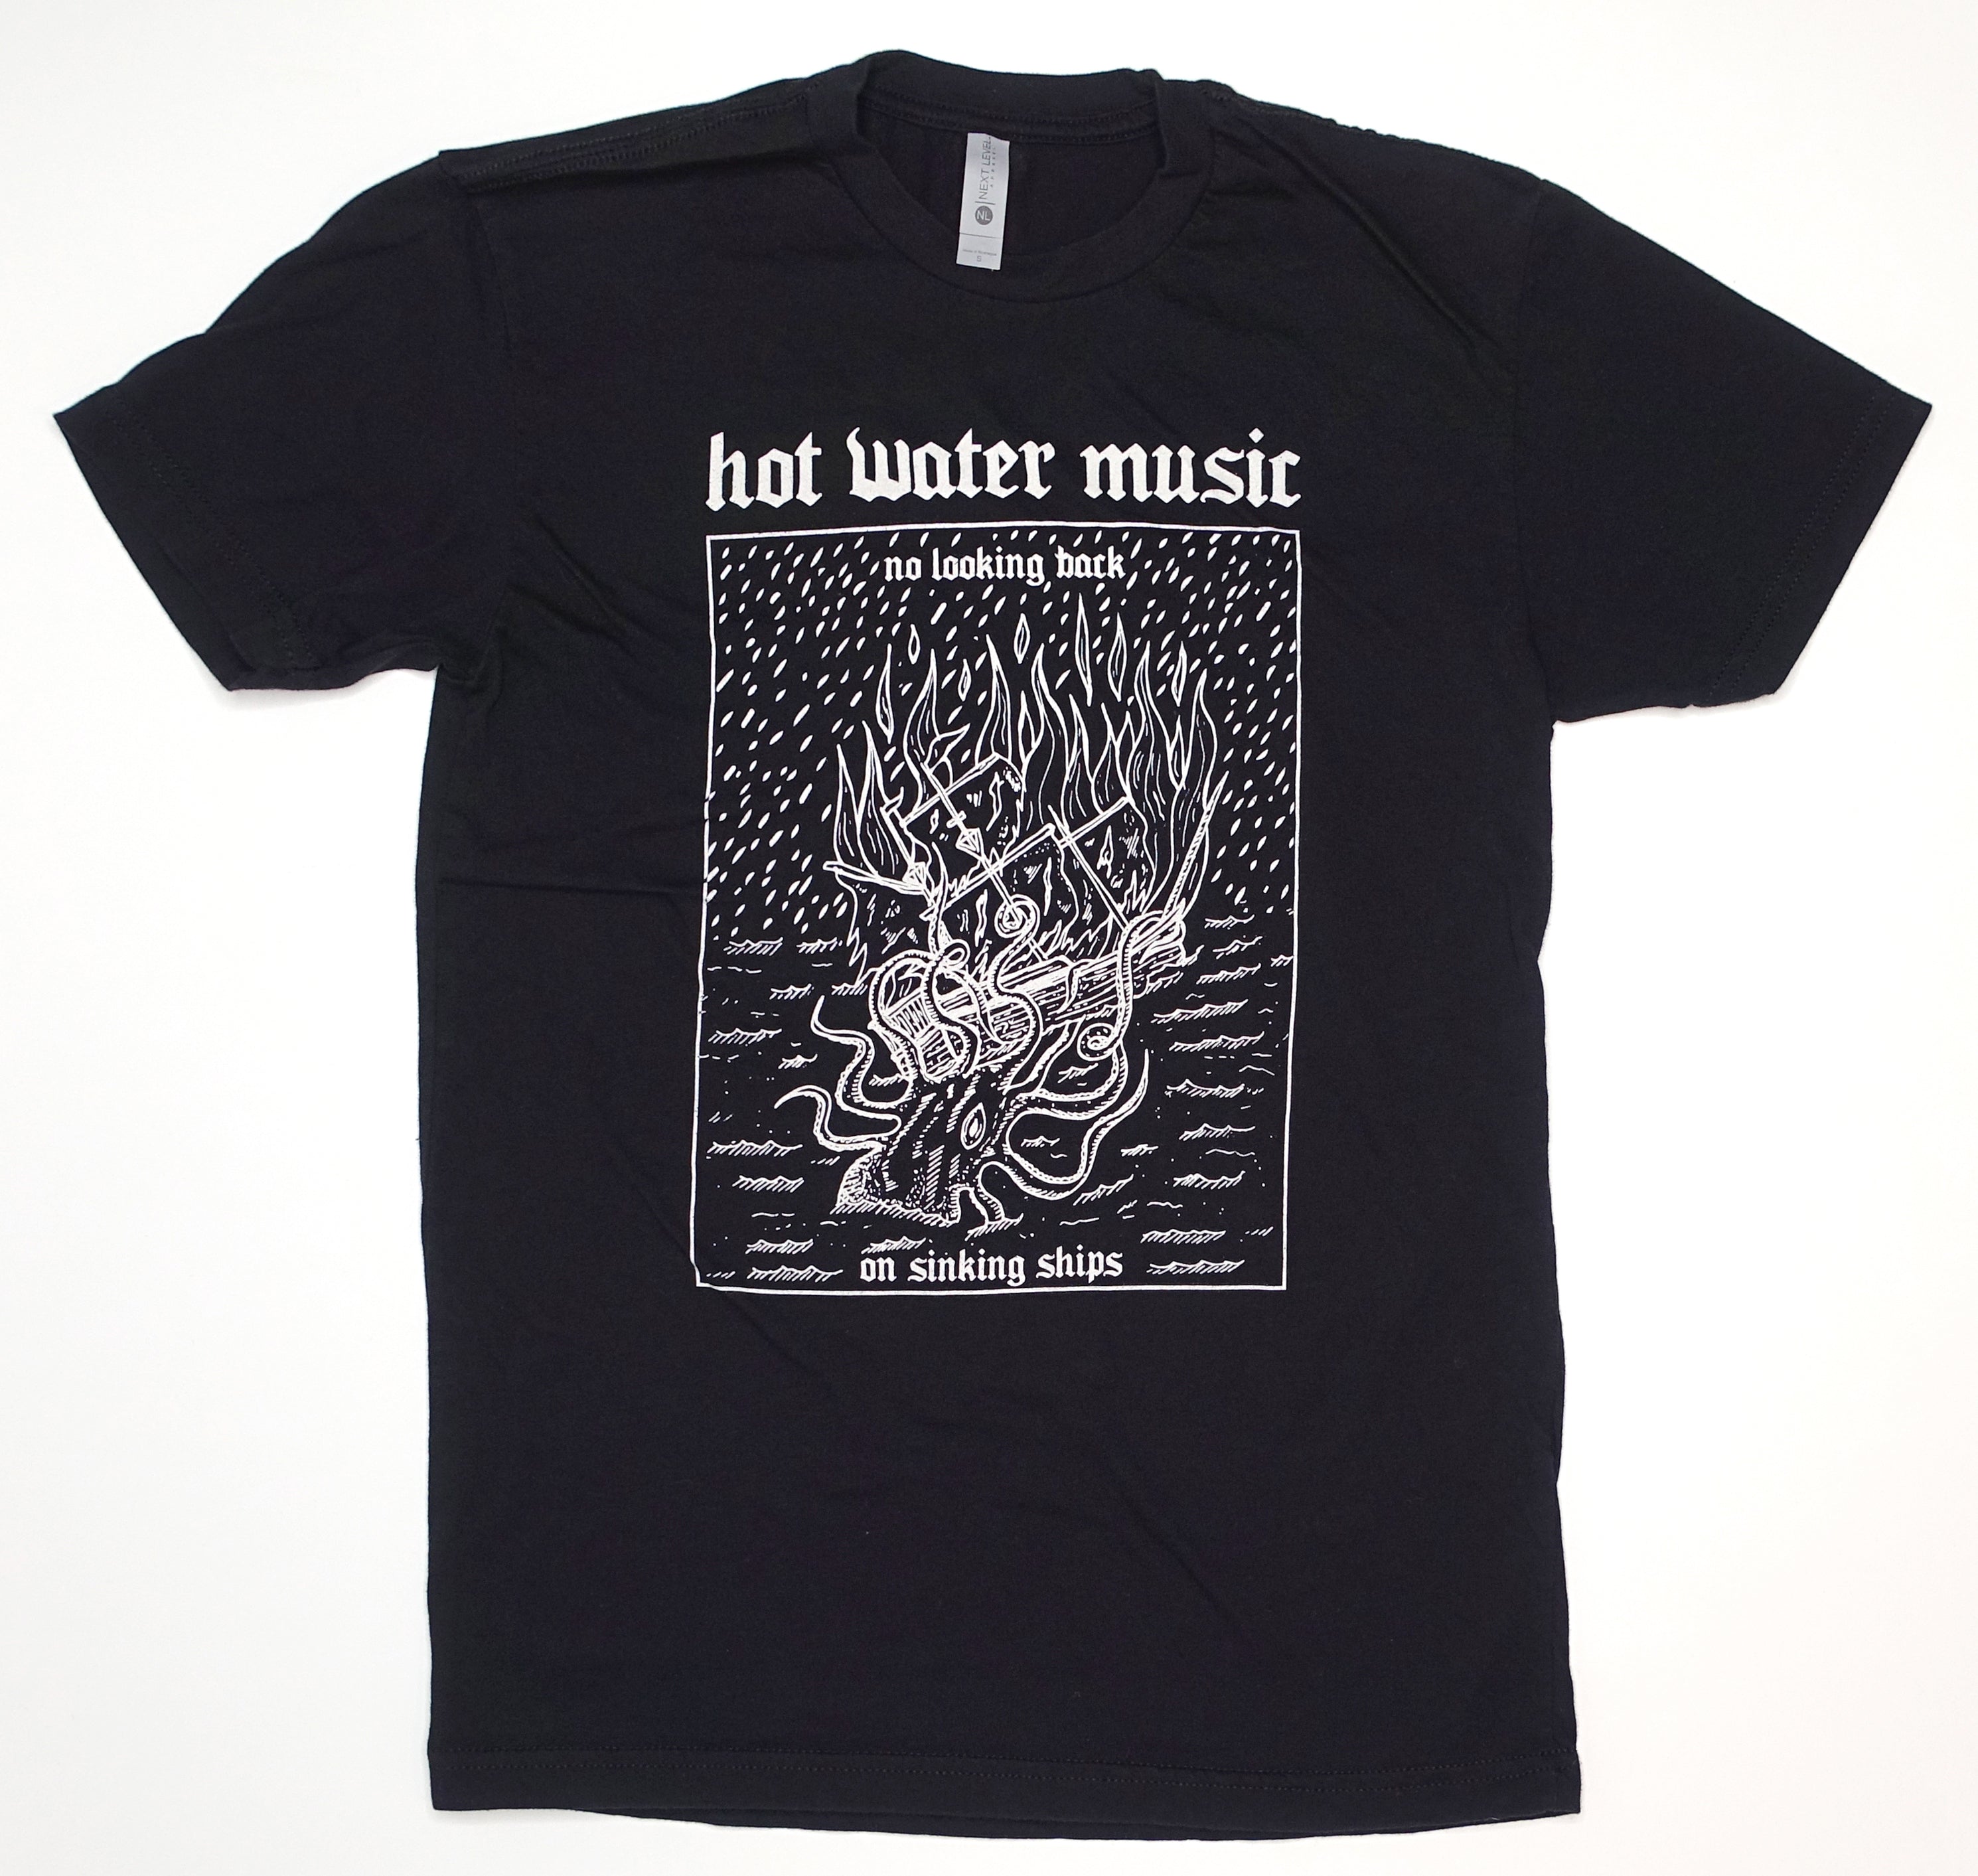 Hot Water Music - No Looking Back On Sinking Ships Tour Shirt Size Small